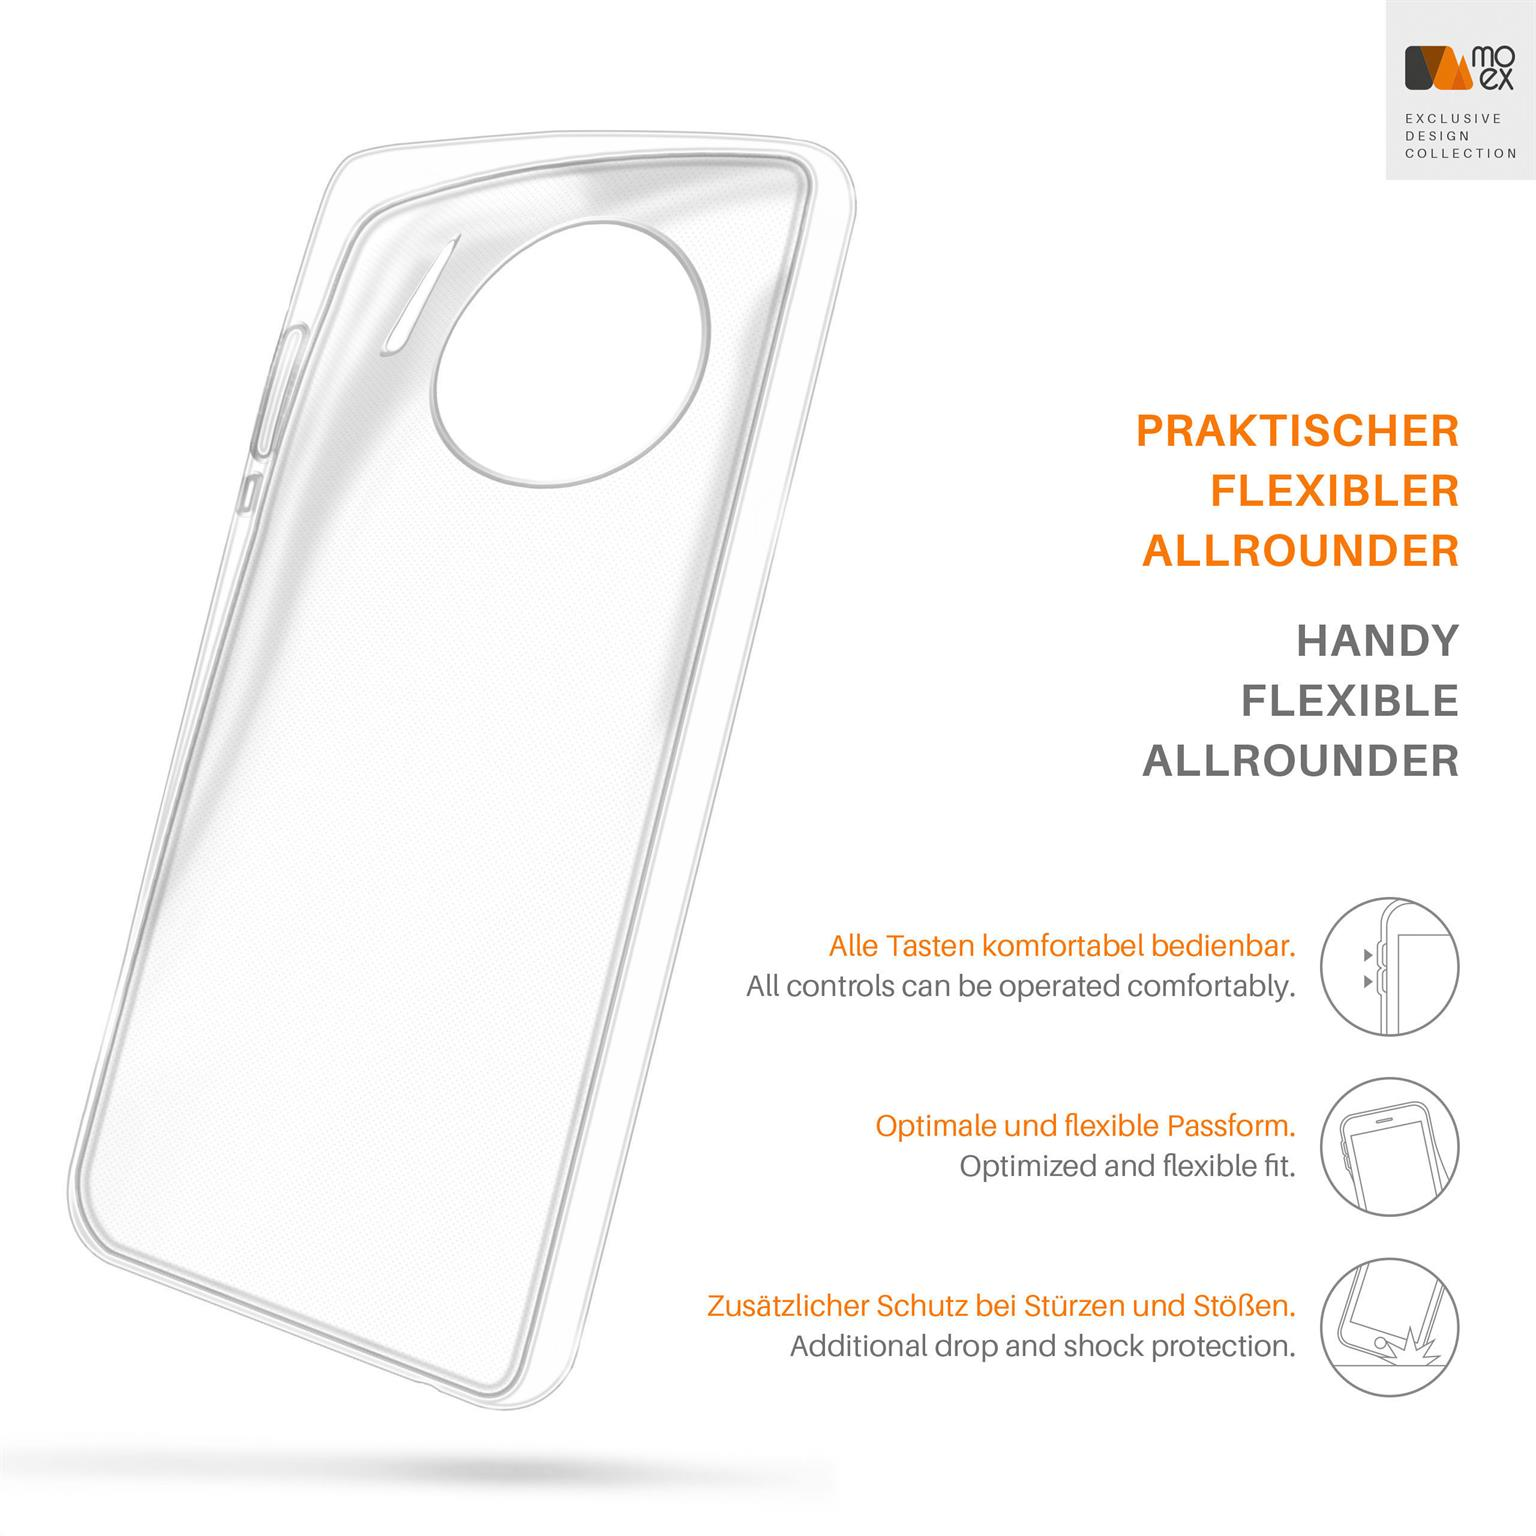 MOEX Aero Case, Backcover, Huawei, Mate 30 Crystal-Clear Pro